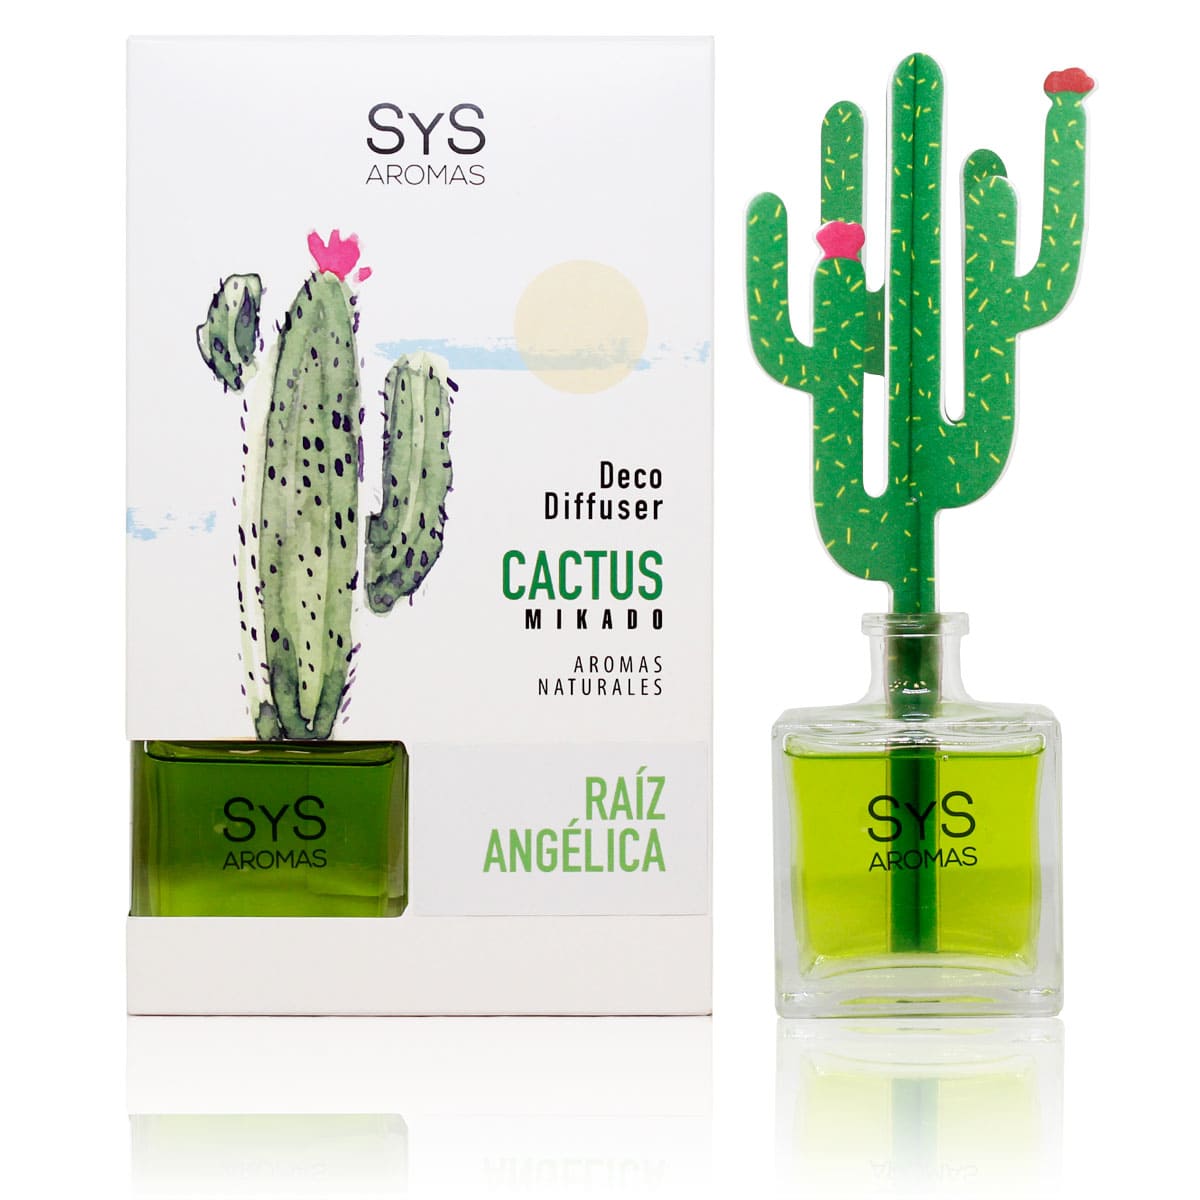 Buy Angelica Root Cactus Diffuser Air Freshener 90ml SYS Aromas